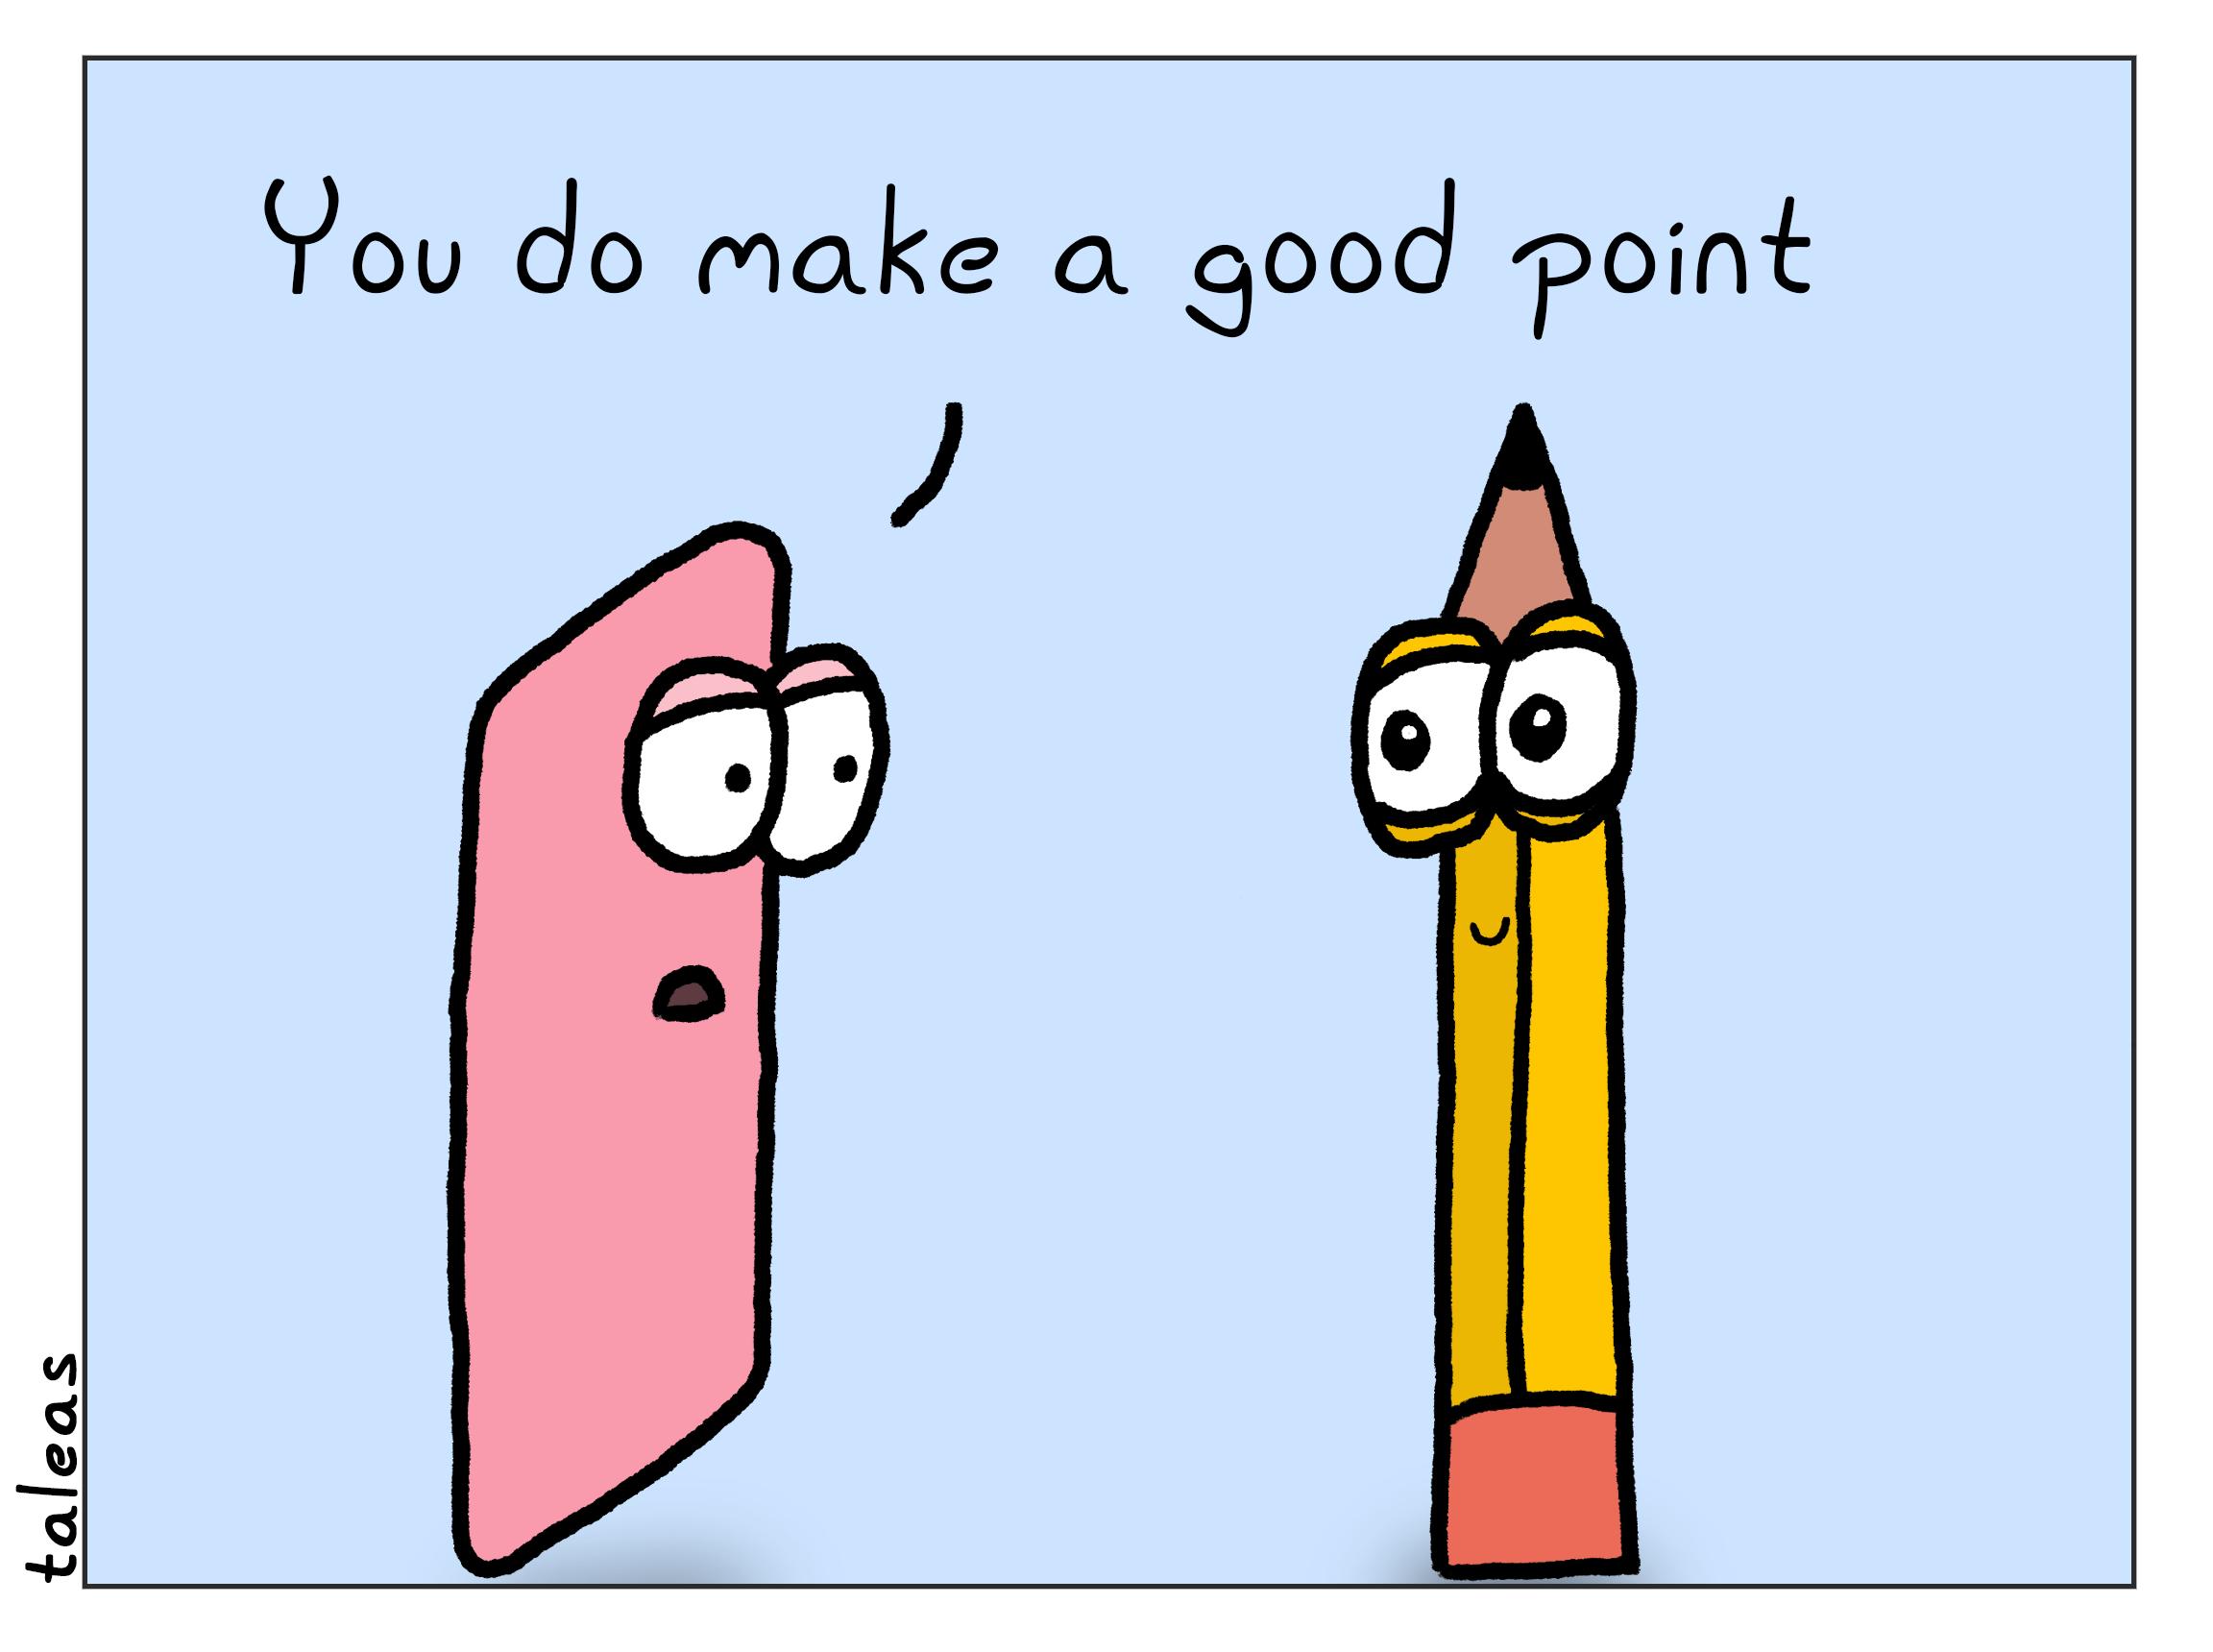 A pink eraser is chatting with a very sharp #2 pencil. The eraser says, "You do make a good point".